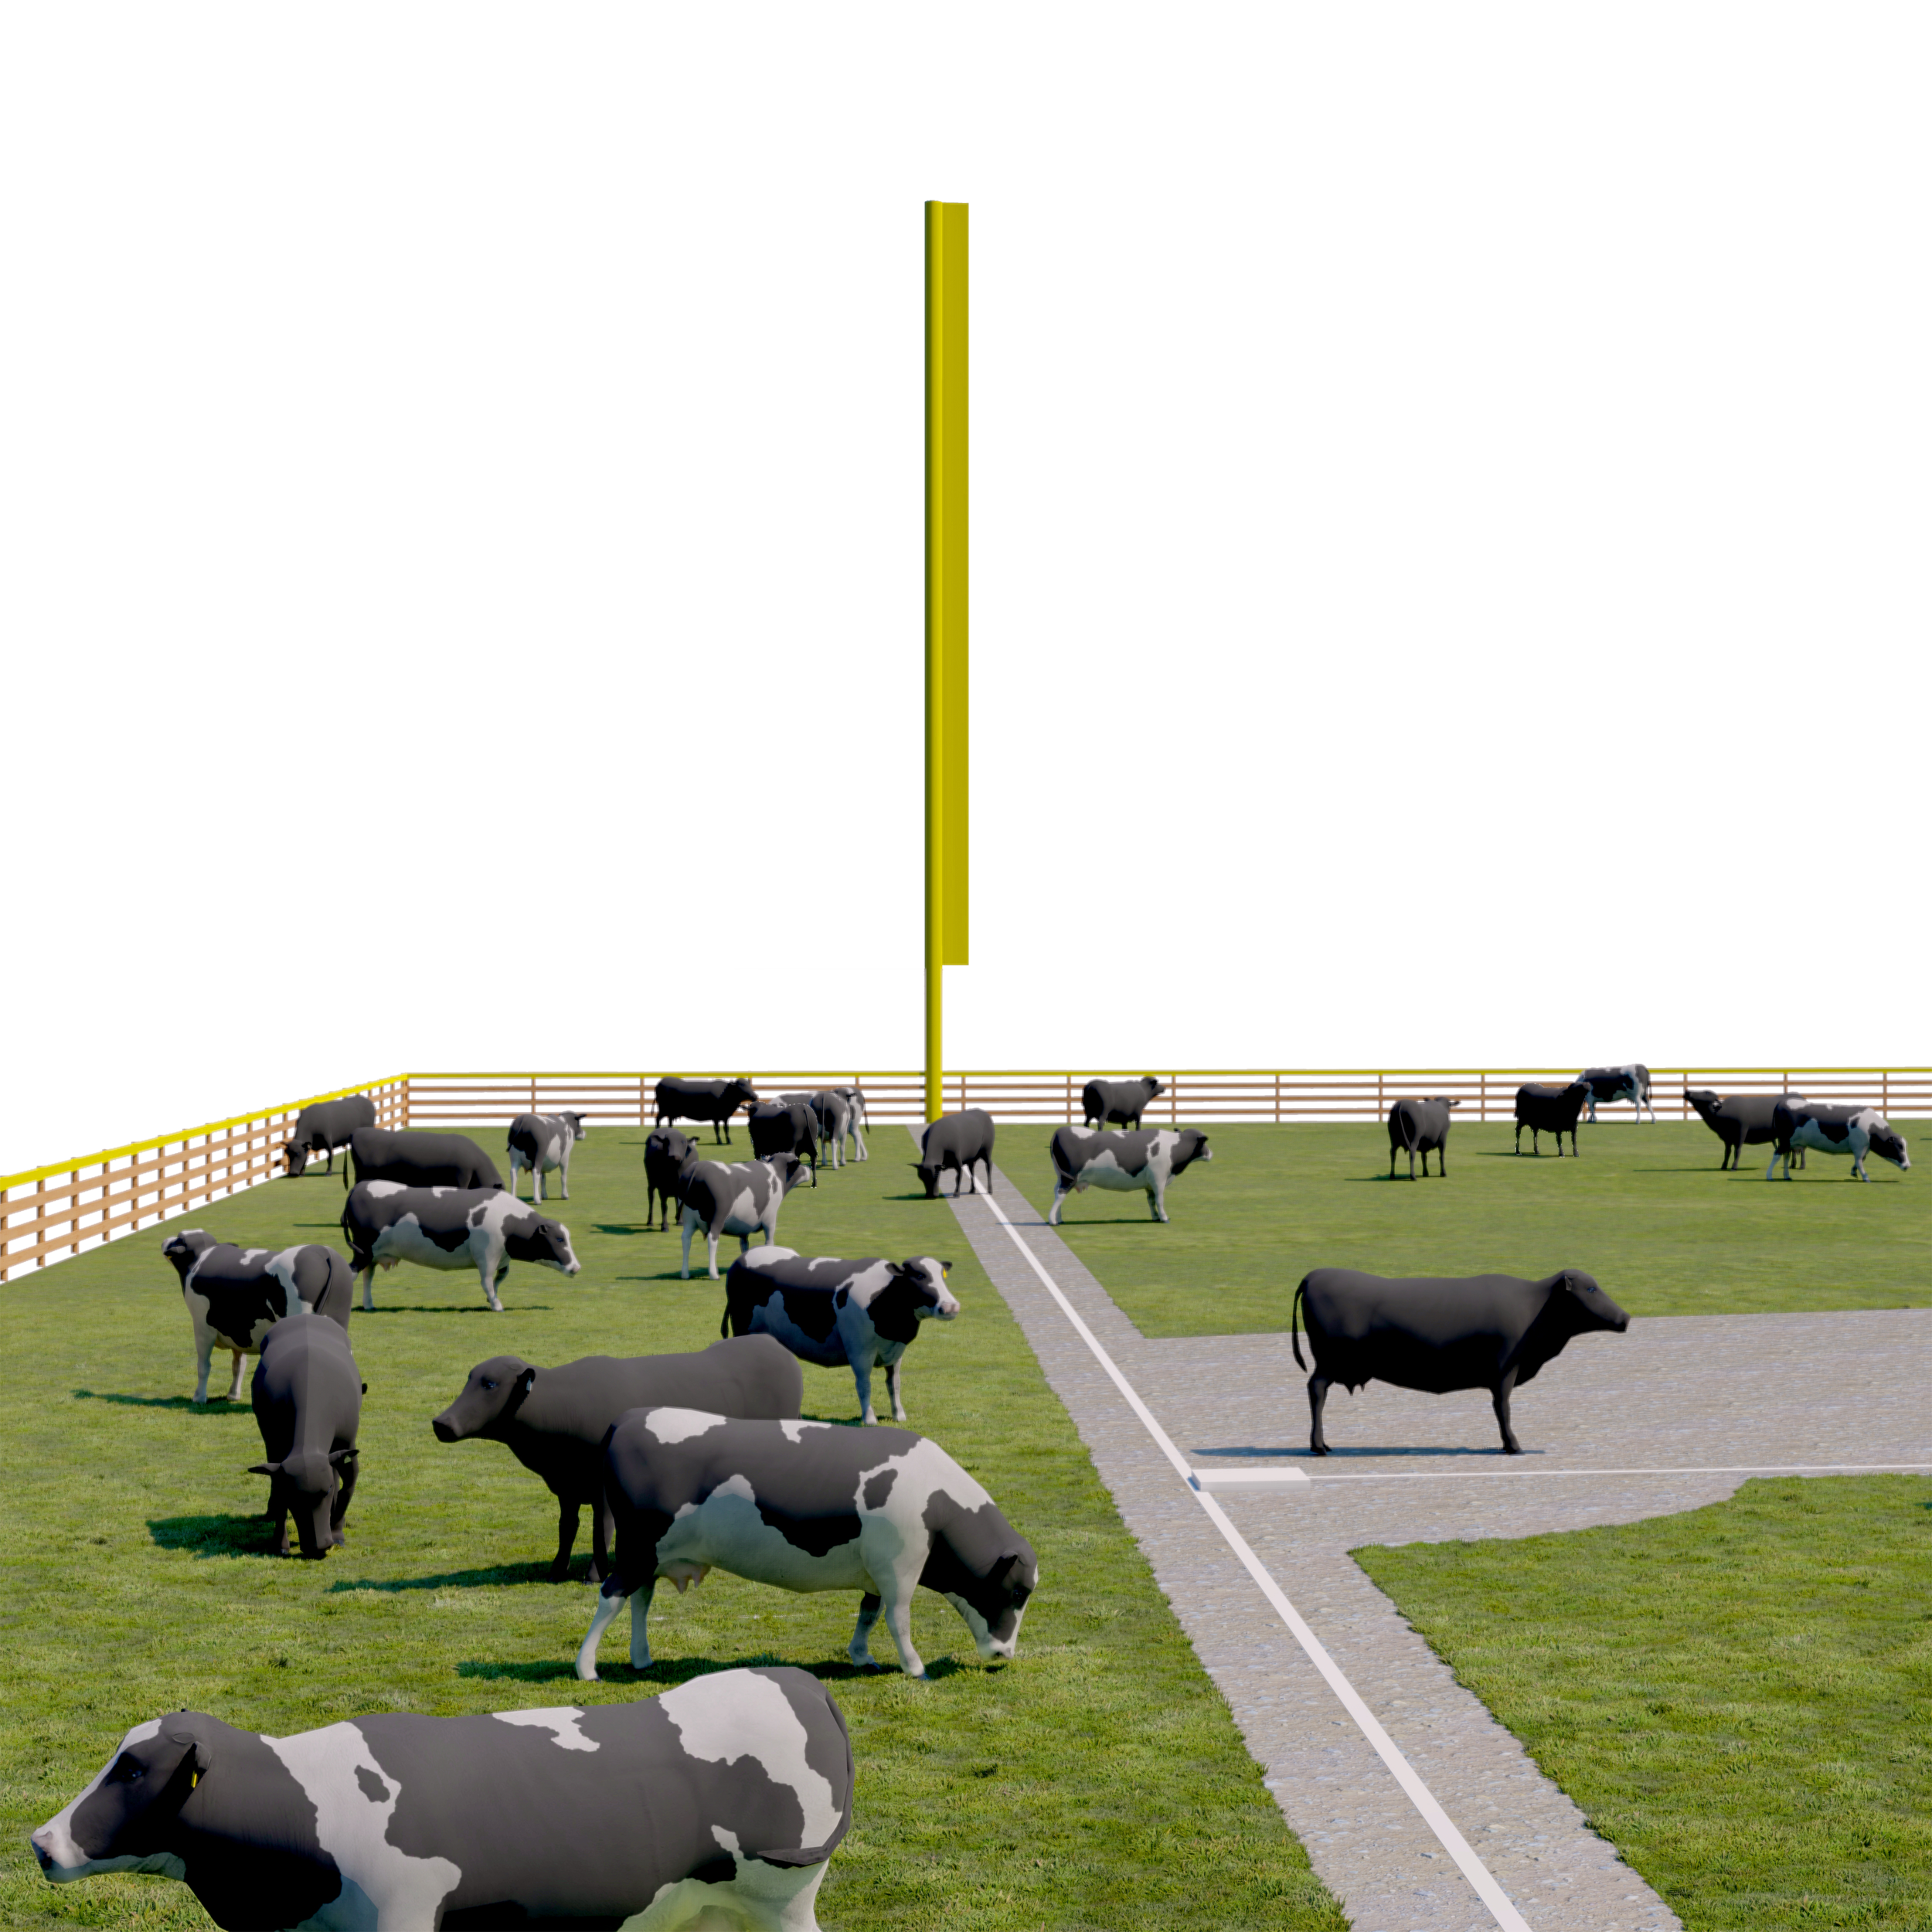  The baseball playing field as a site of ecological mutualism between humans and cows. The space of the pasture/baseball field conditions both cow and human bodies while also offering nutrition for cows and grounds maintenance for the humans. 